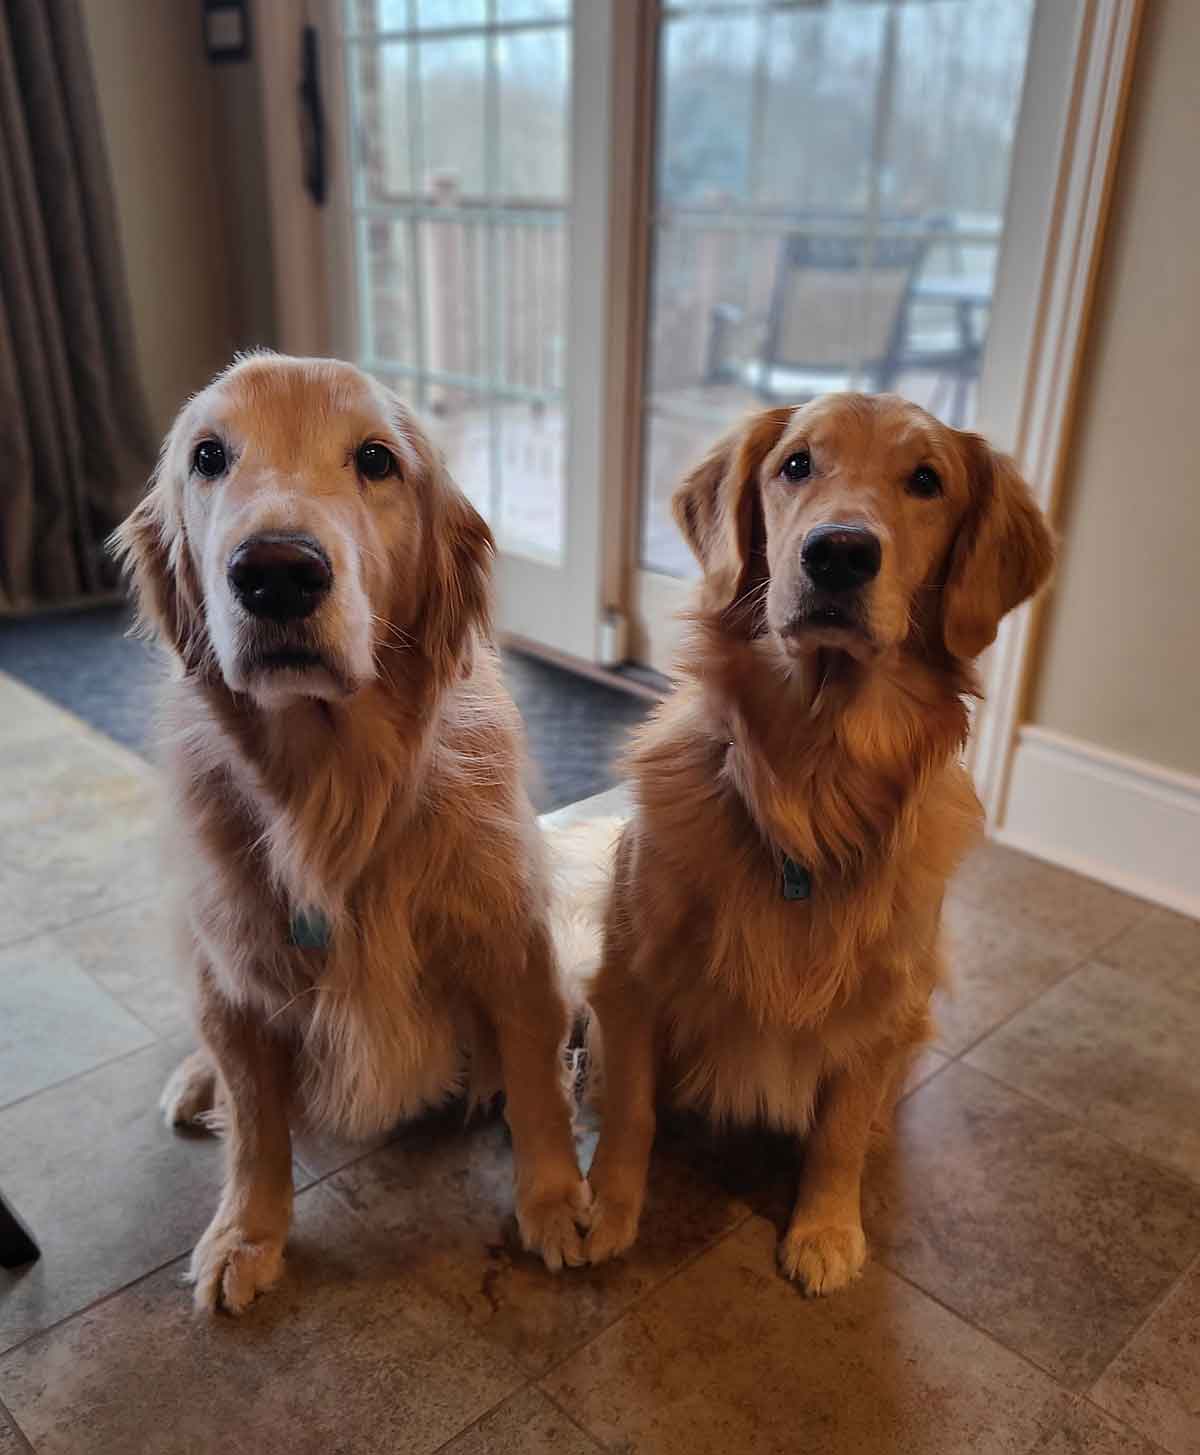 Two golden retriever dogs sitting next to each other in front of a sliding glass door.